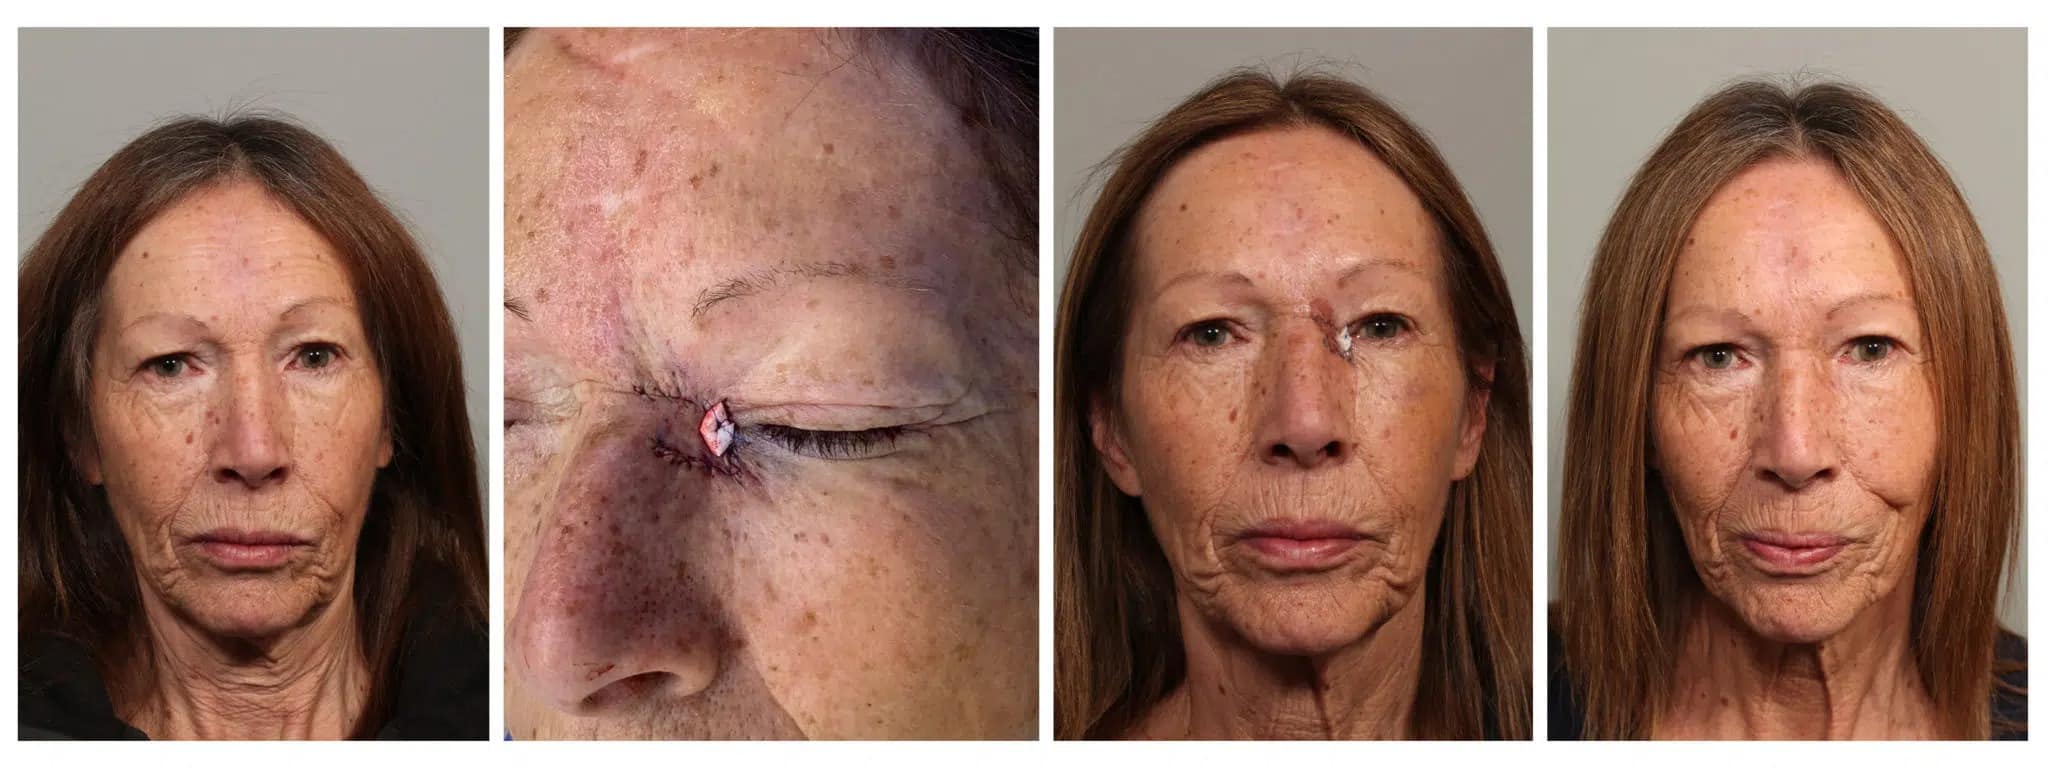 female patient with basal carcinoma on eye before and after removal